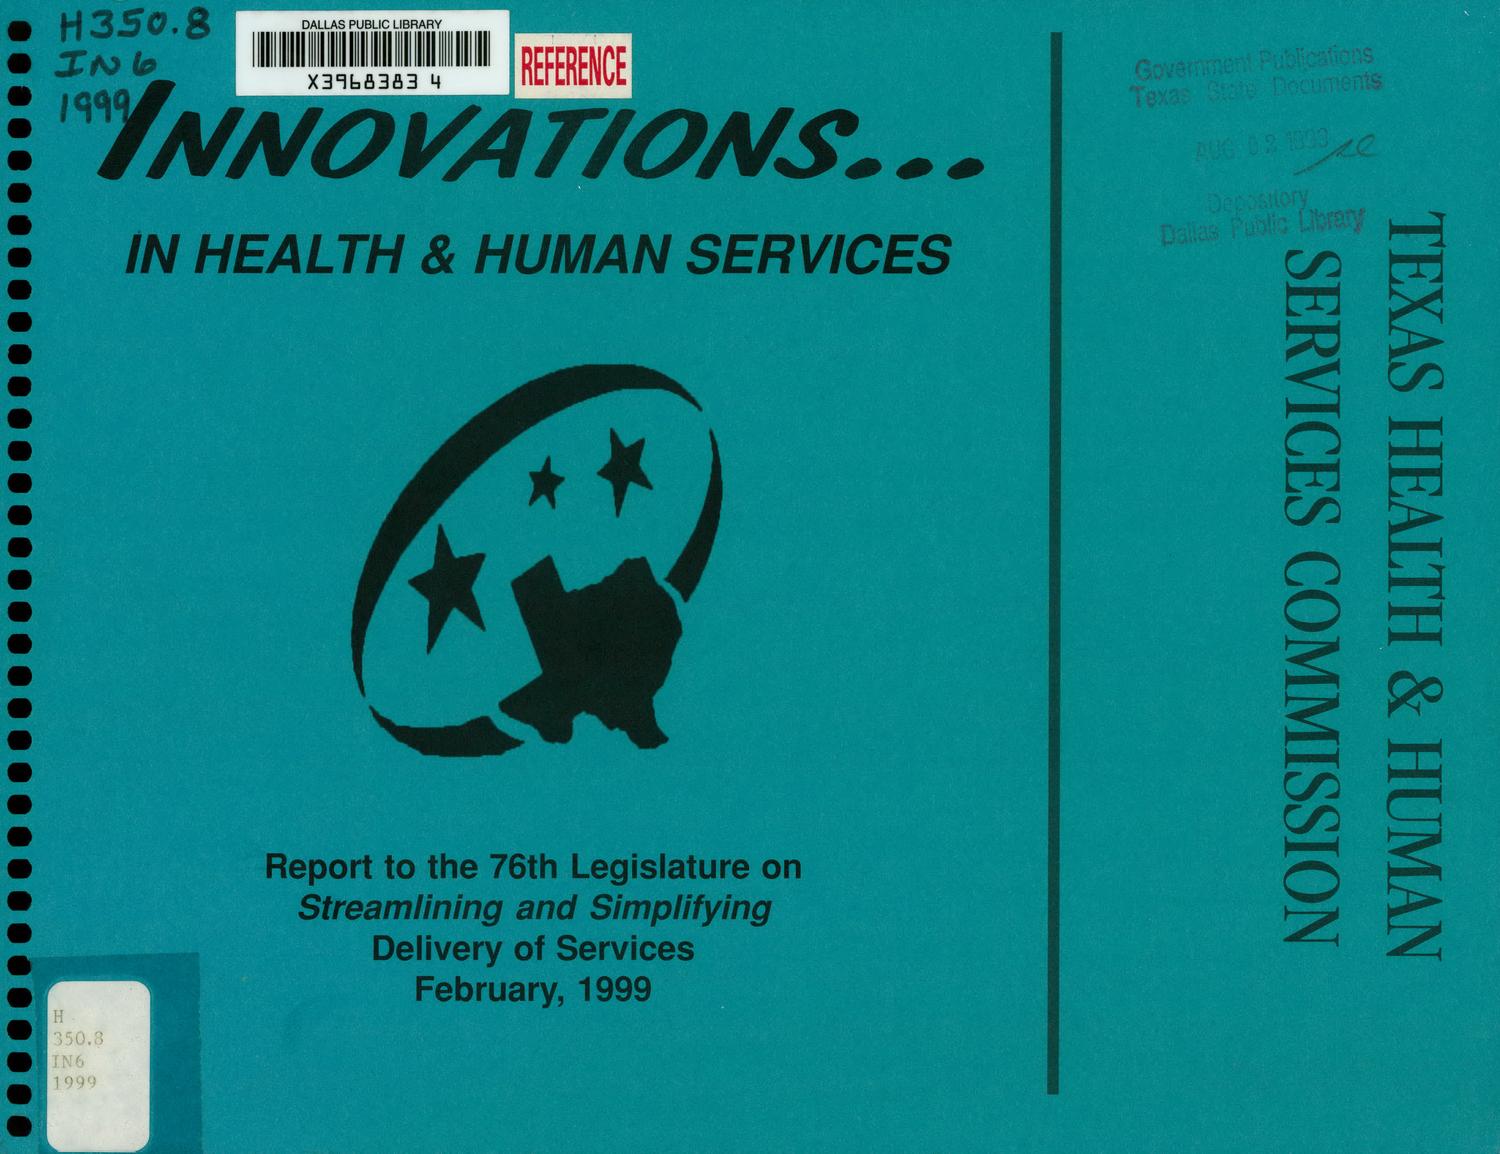 Innovations...in Health and Human Services: Report to the 76th Legislature on Streamlining and Simplifying Delivery of Services February 1999
                                                
                                                    FRONT COVER
                                                